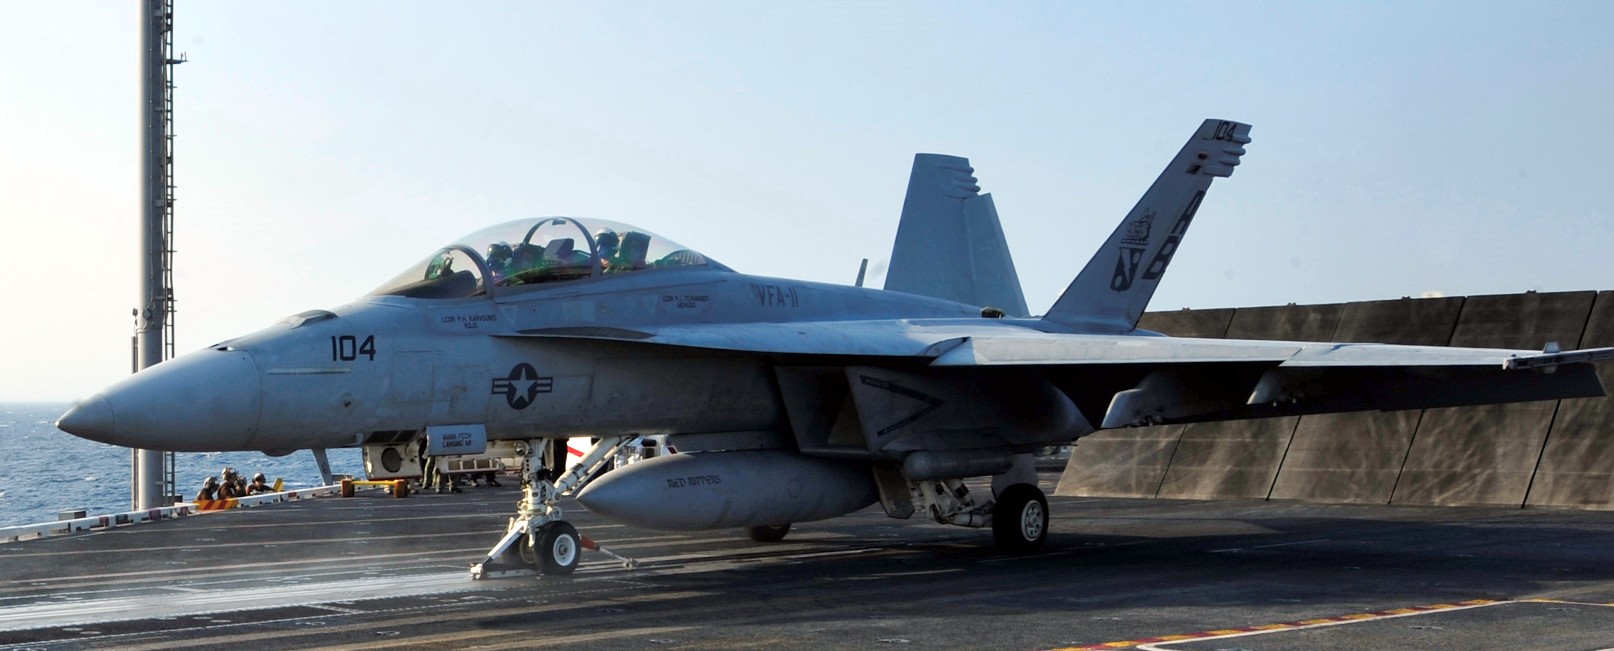 vfa-11 red rippers strike fighter squadron us navy f/a-18f super hornet carrier air wing cvw-1 uss enterprise cvn-65 51